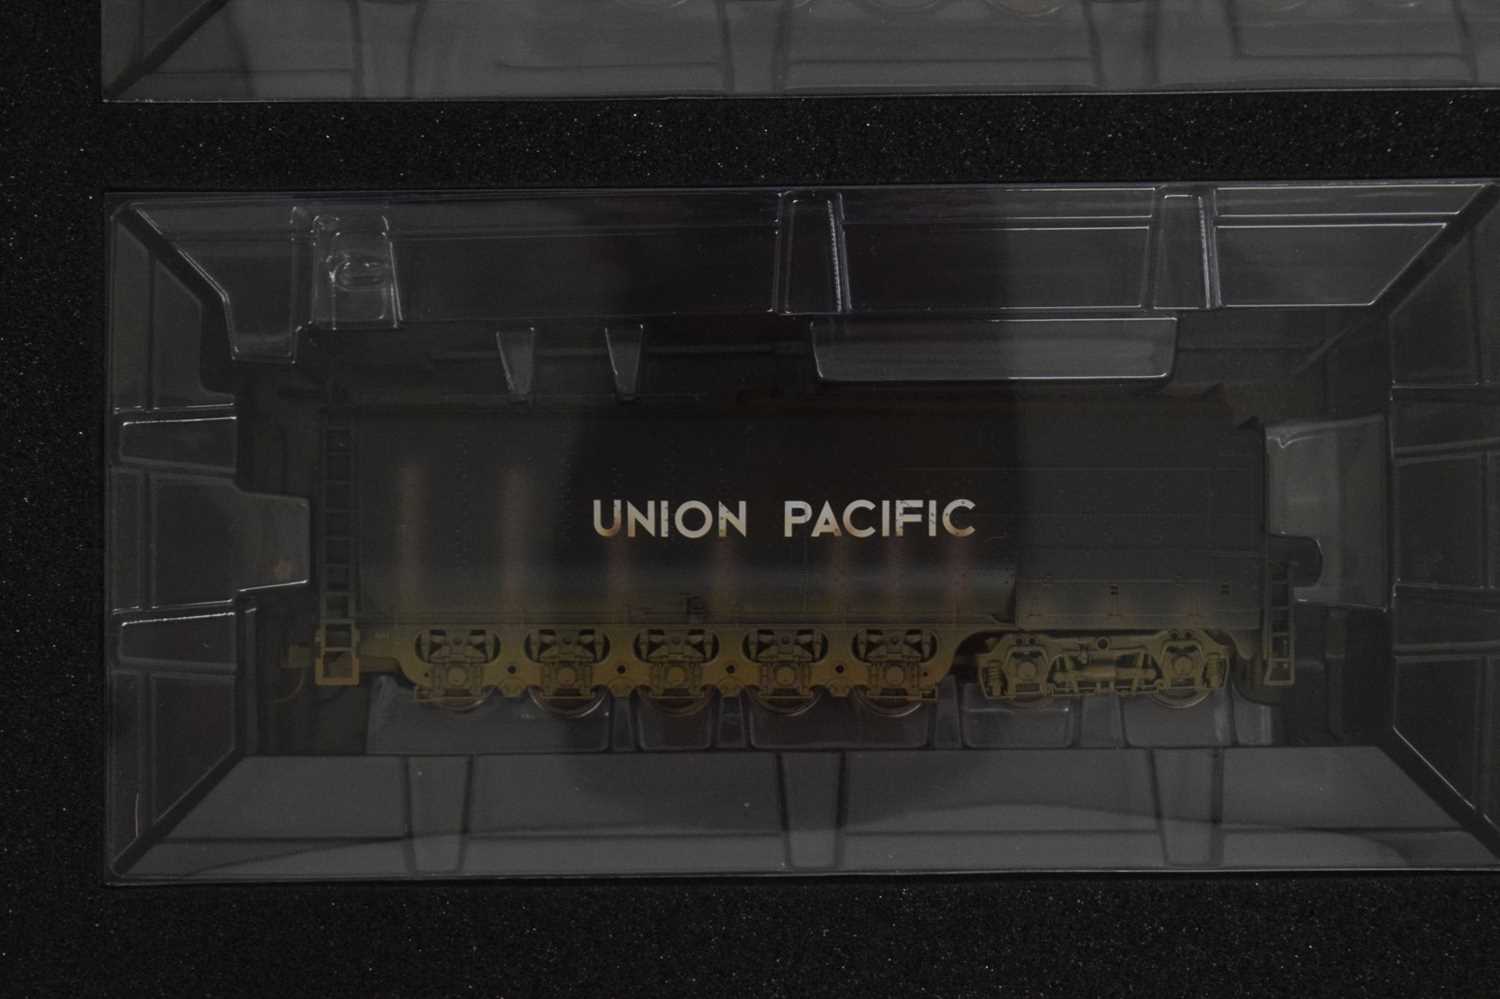 Rivarossi HO 1:87 scale 'Union Pacific and Trixtrains locomotive - Image 4 of 6